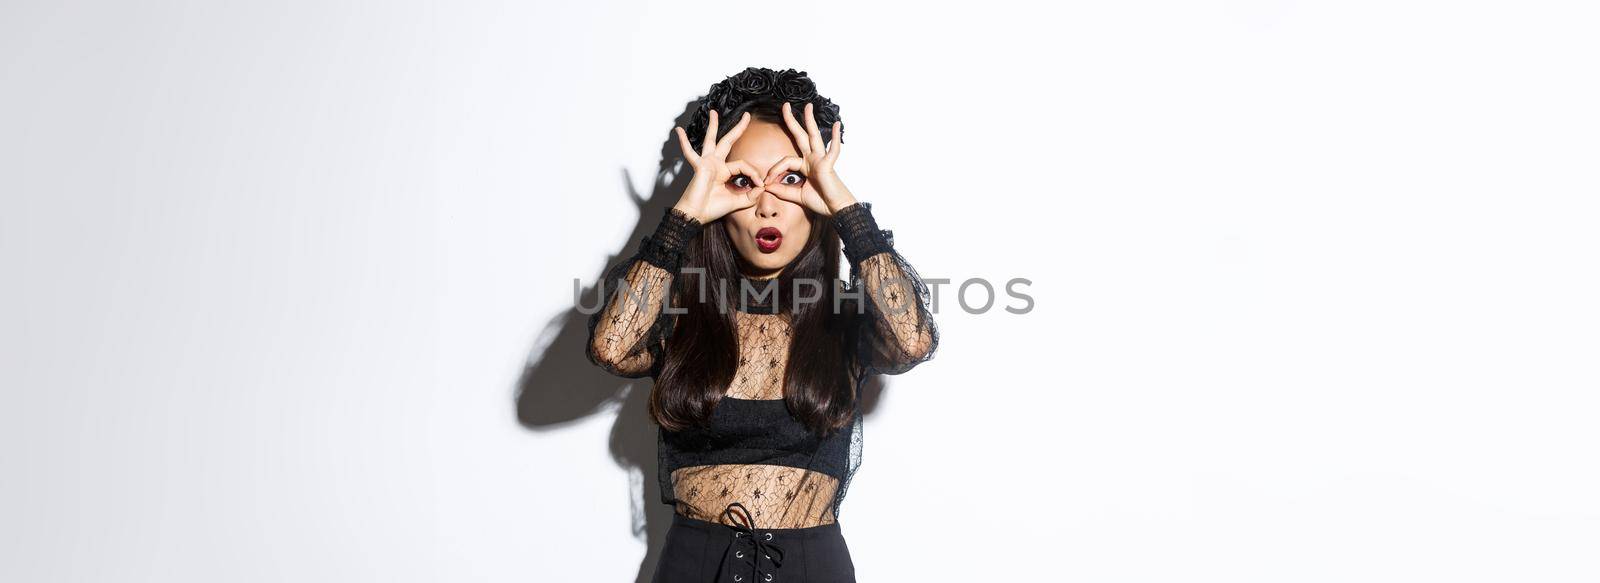 Image of surprised cute asian woman wearing witch costume, making finger glasses over eyes and looking through them impressed, standing over white background.